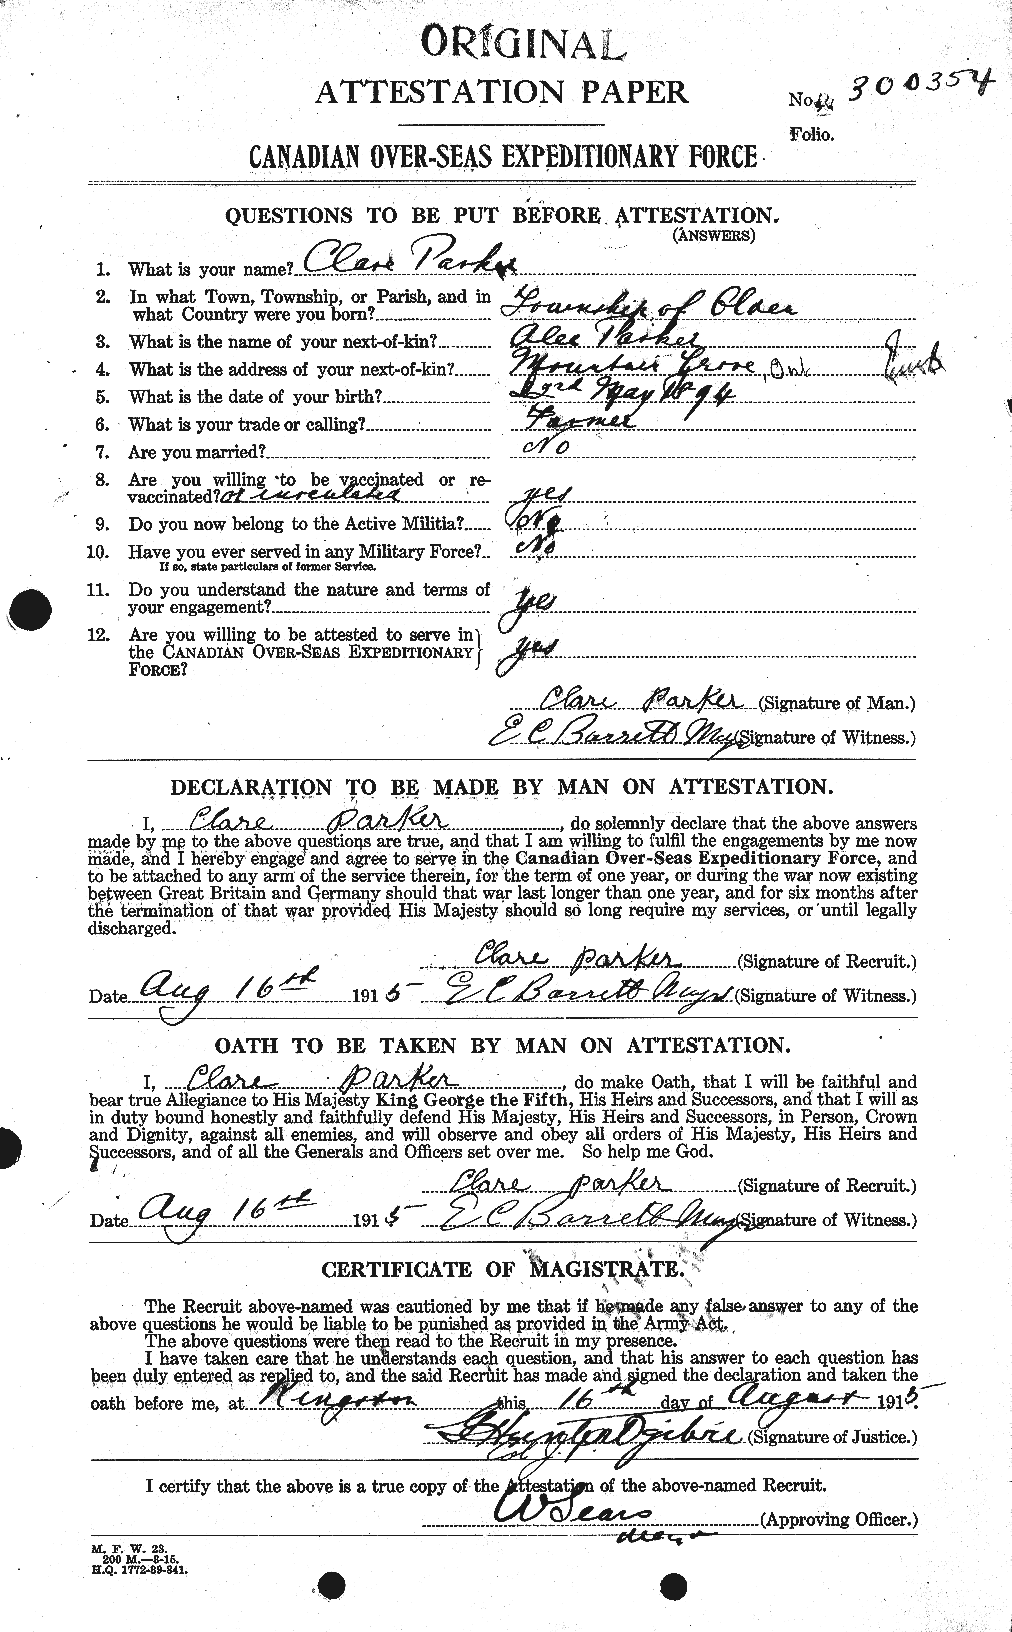 Personnel Records of the First World War - CEF 565083a